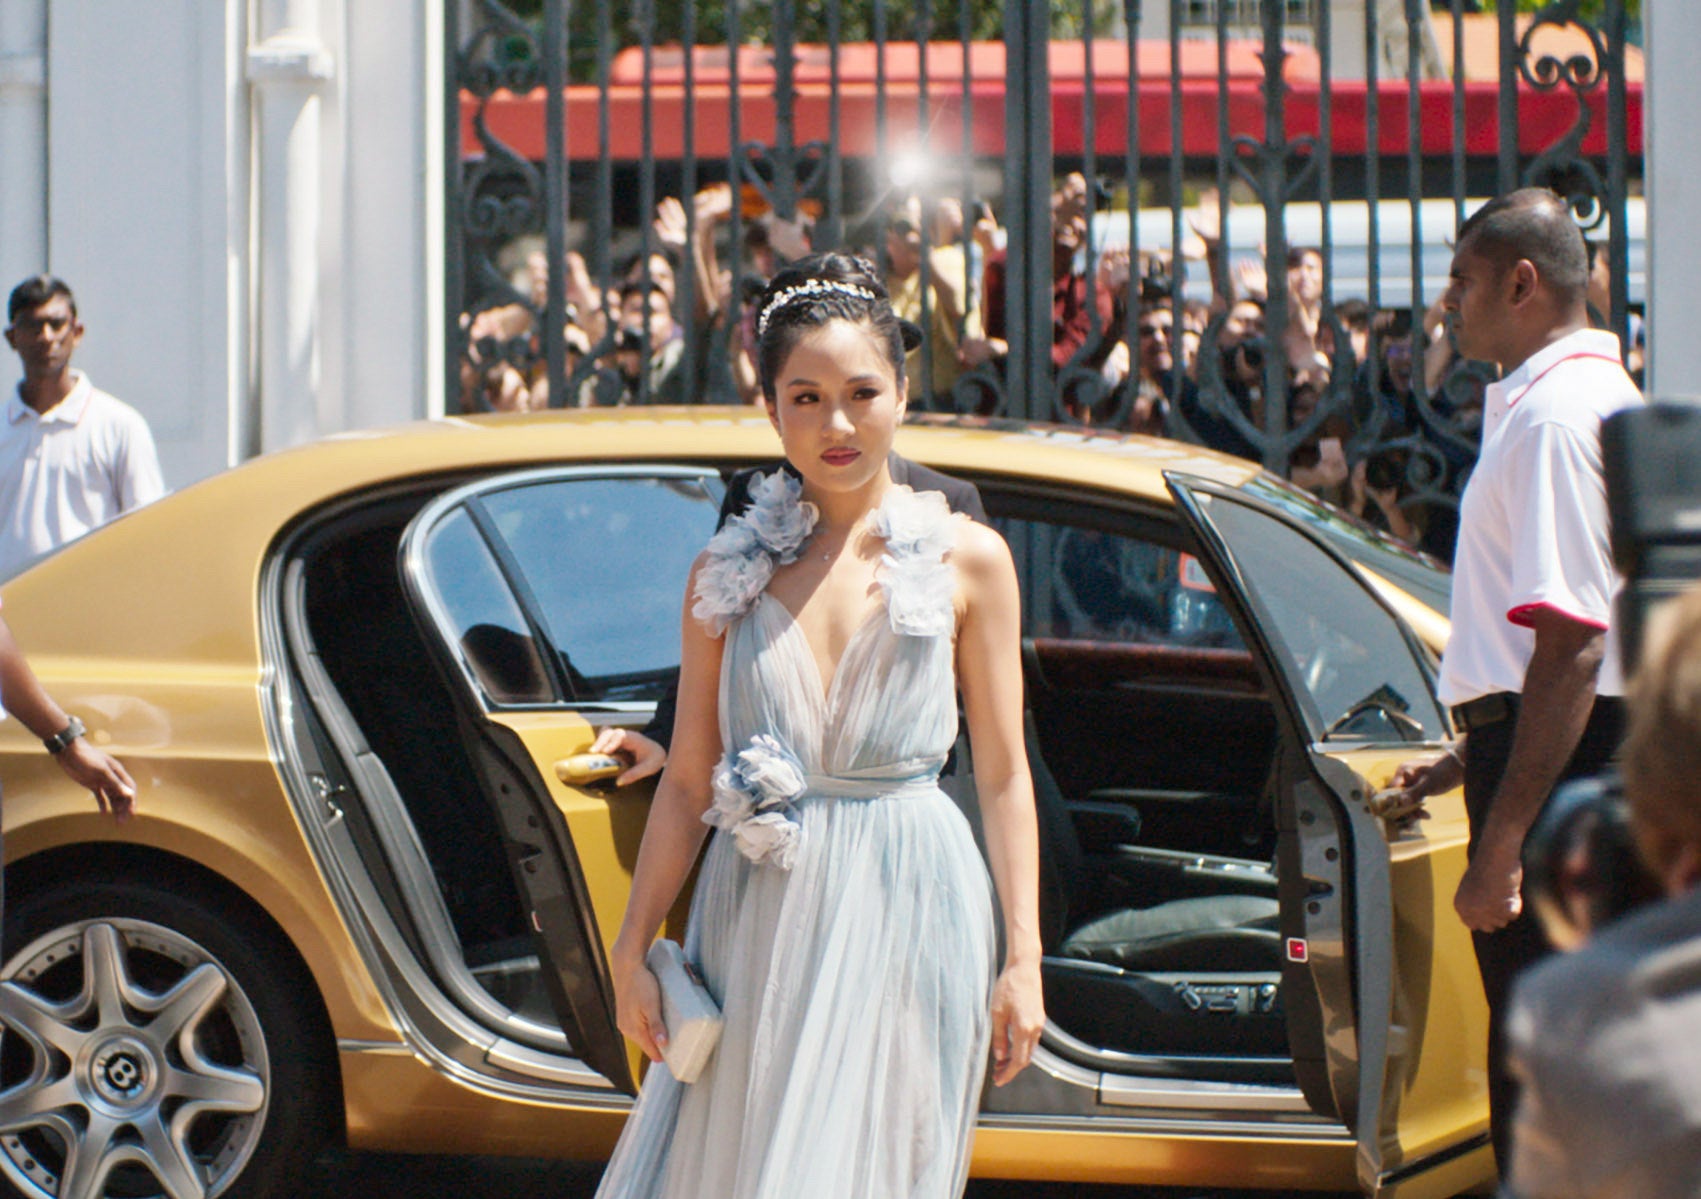 Constance Wu getting out of a gold car in a blue tulle dress